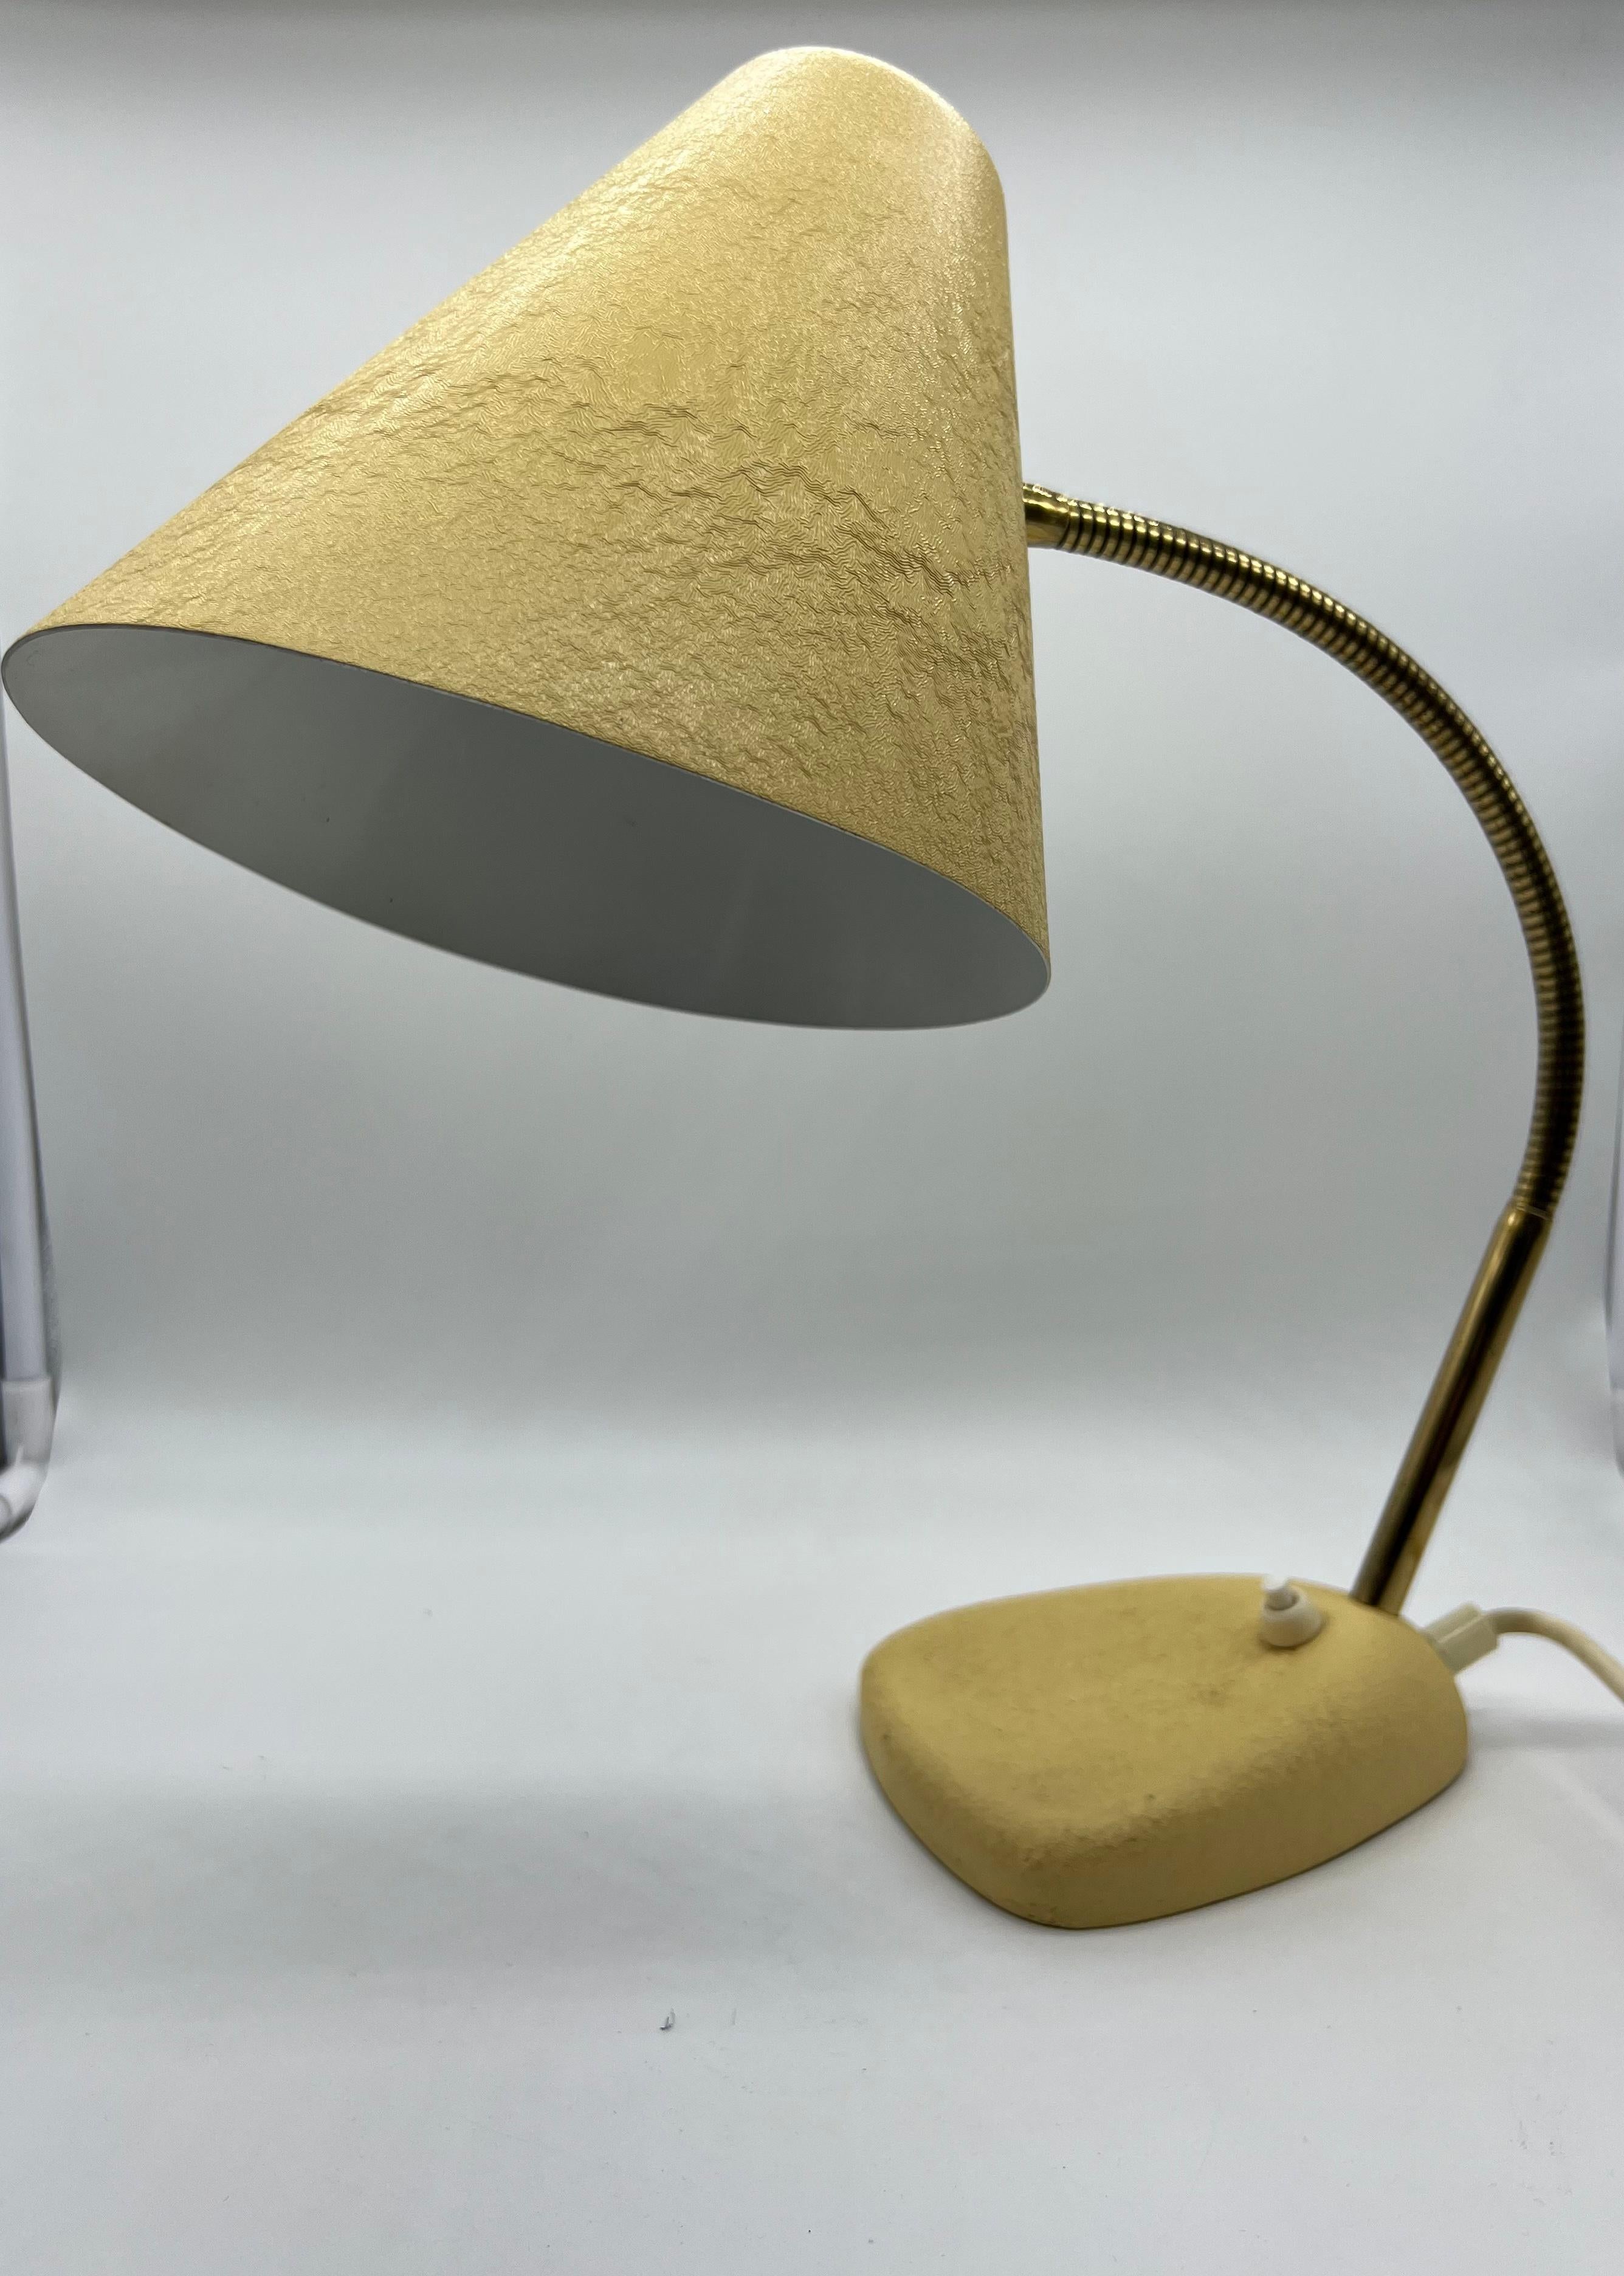 Other Yellow Table Lamp with Shrink Varnish and Movable Shade, Mid-20th Century For Sale